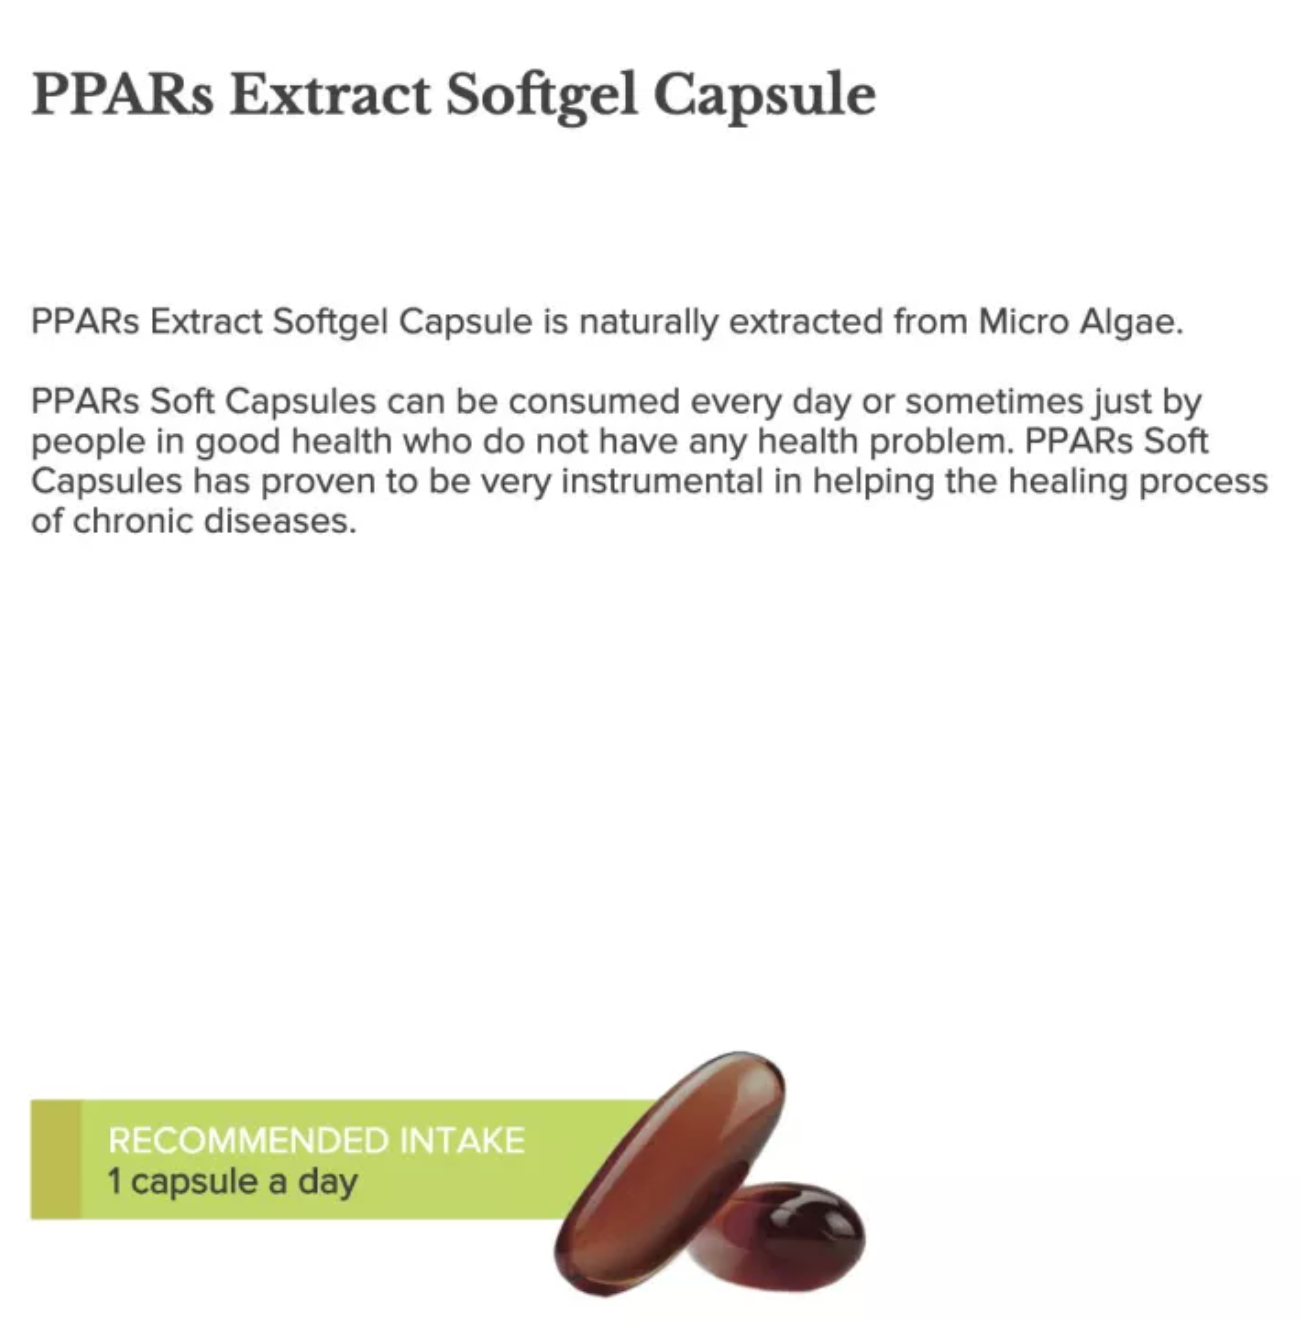 PPARs Extract Softgel 3 Blister 30 Capsules